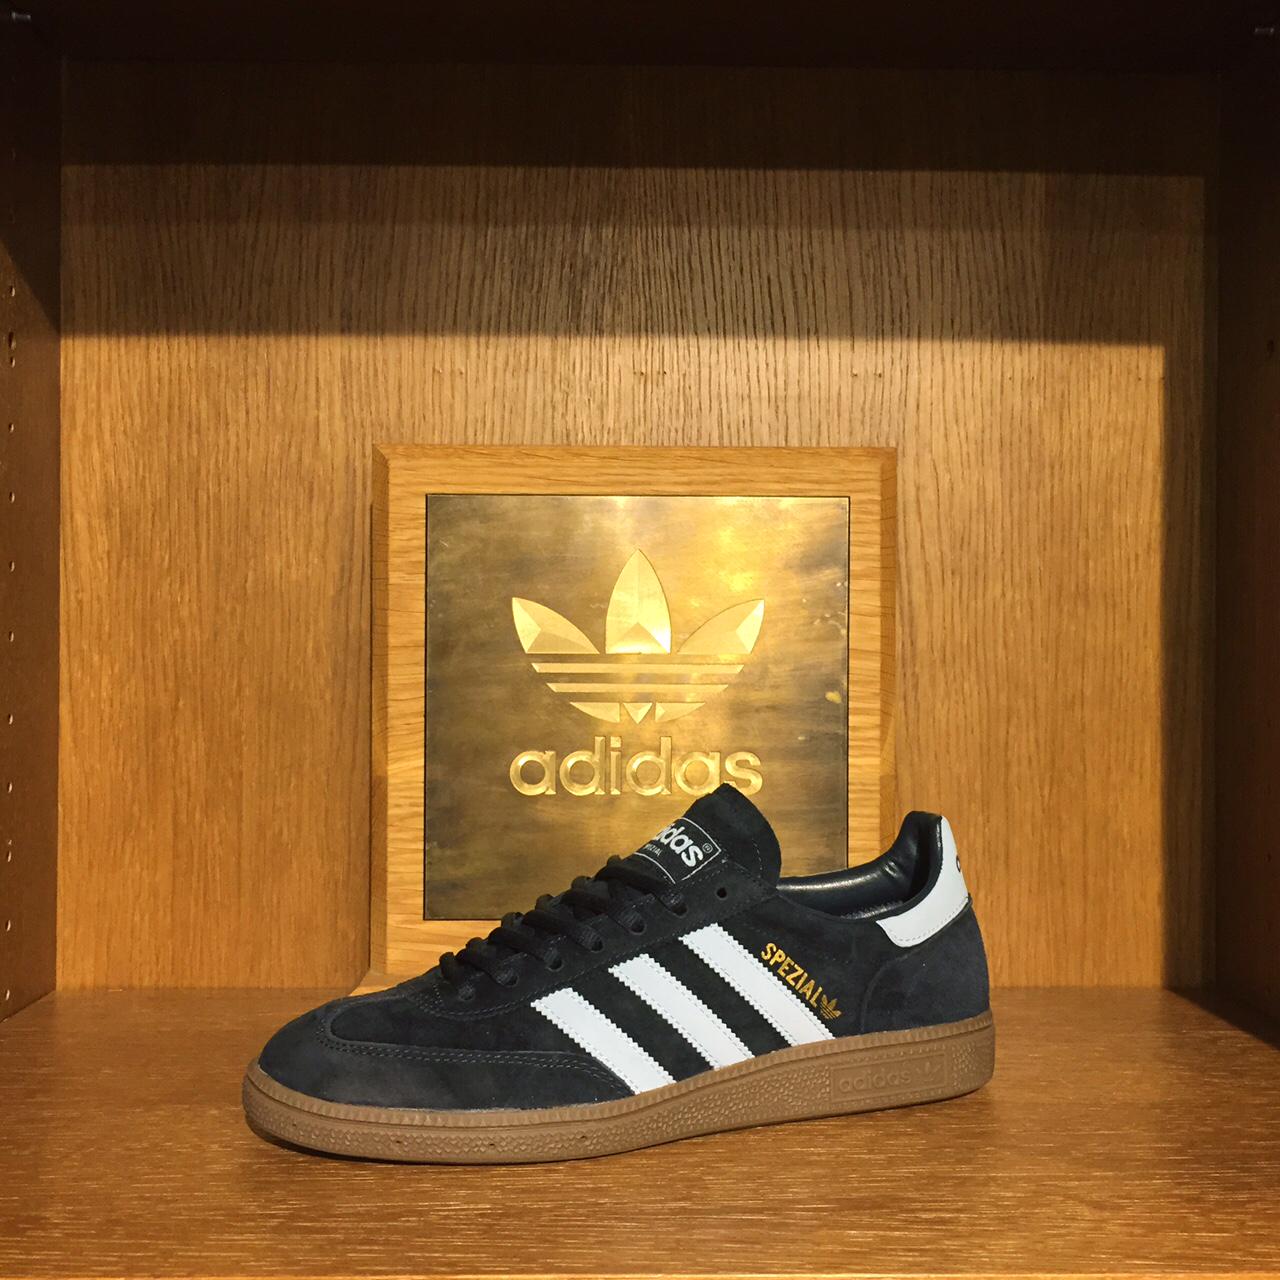 SNS Twitter: "The classic adidas Originals Spezial 'Dark Navy/Argentina Blue' is available online! http://t.co/jxhSuSyy2B http://t.co/2o03js7EVG" / Twitter